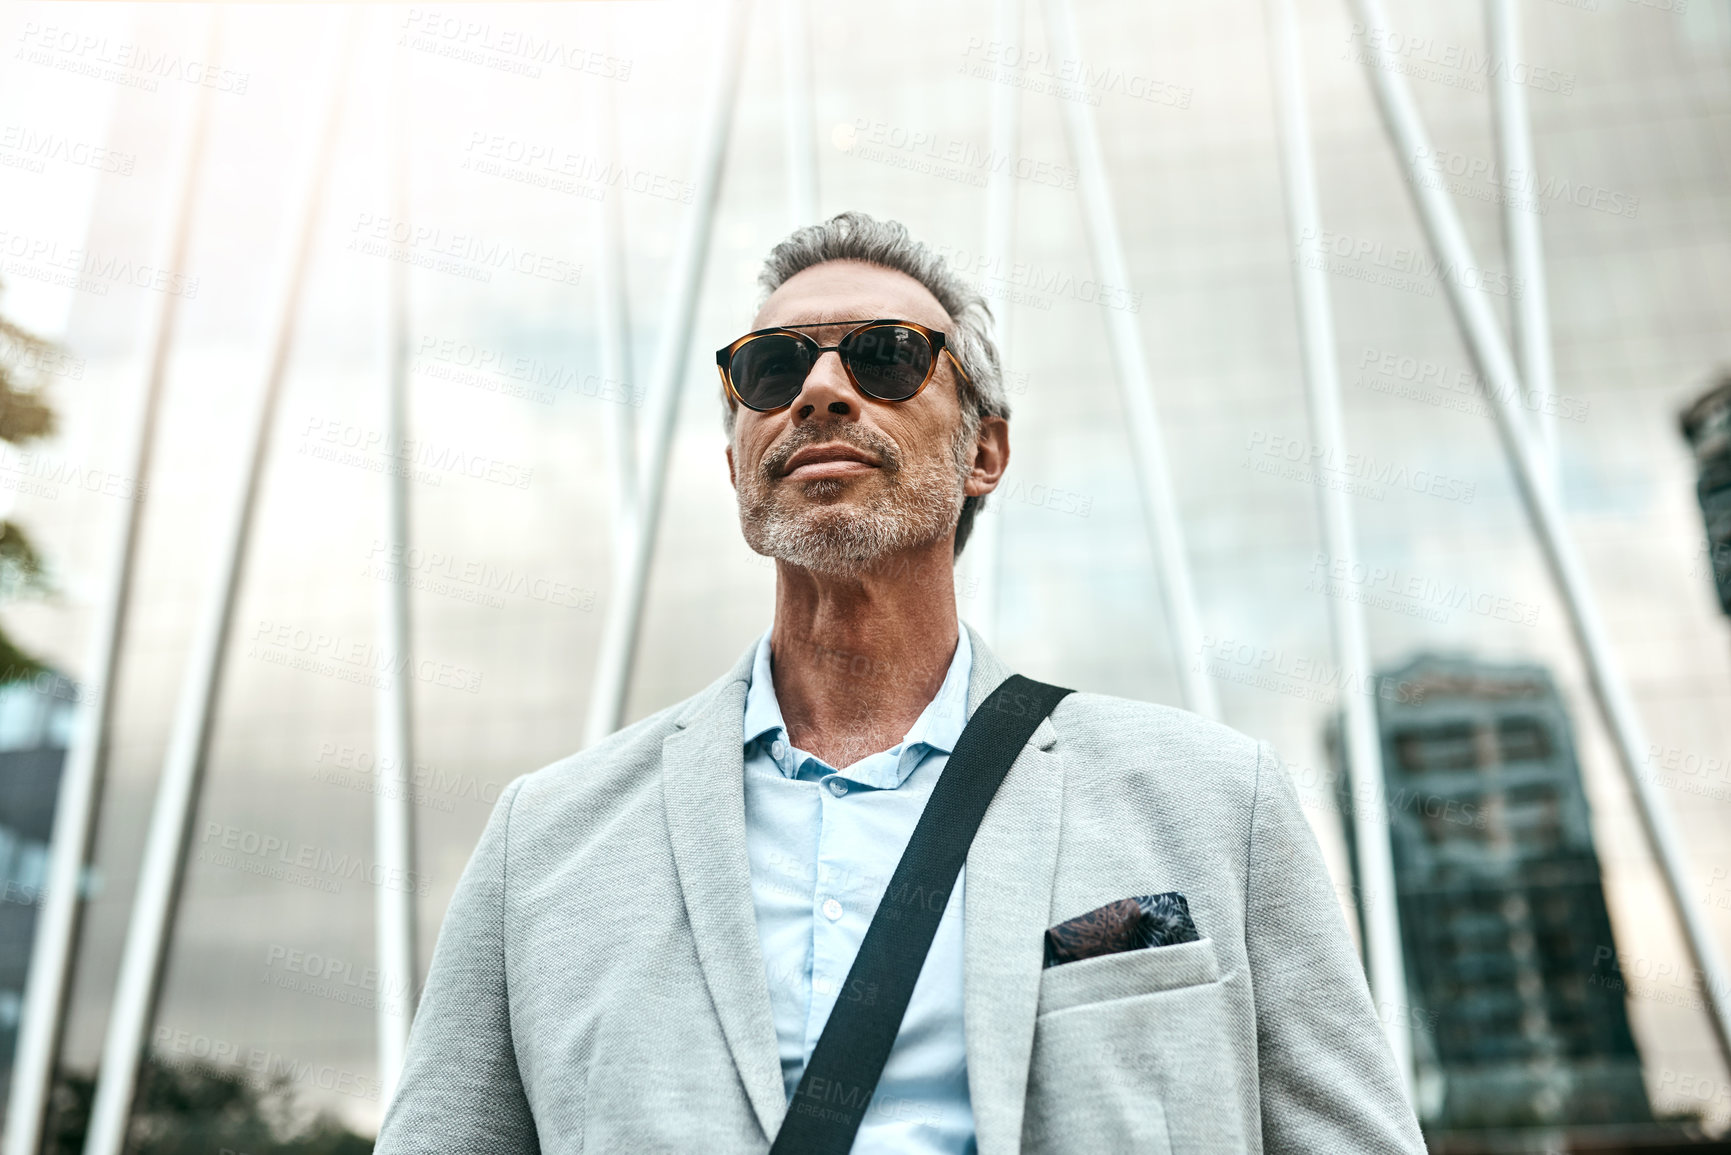 Buy stock photo Shot of a mature businessman out in the city